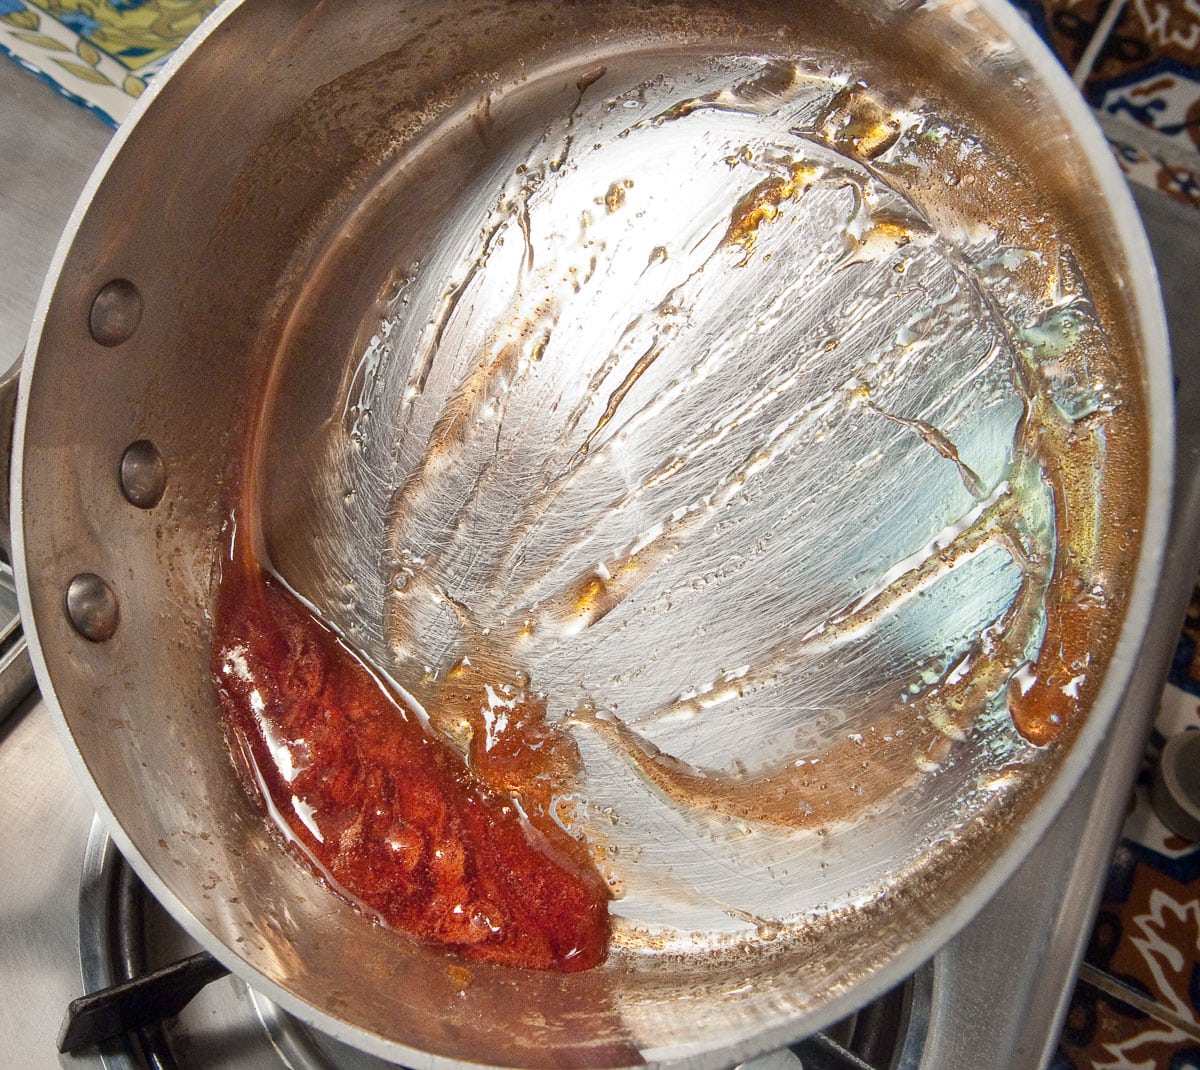 The syrup has been reduced to a thick jelly like mixture.